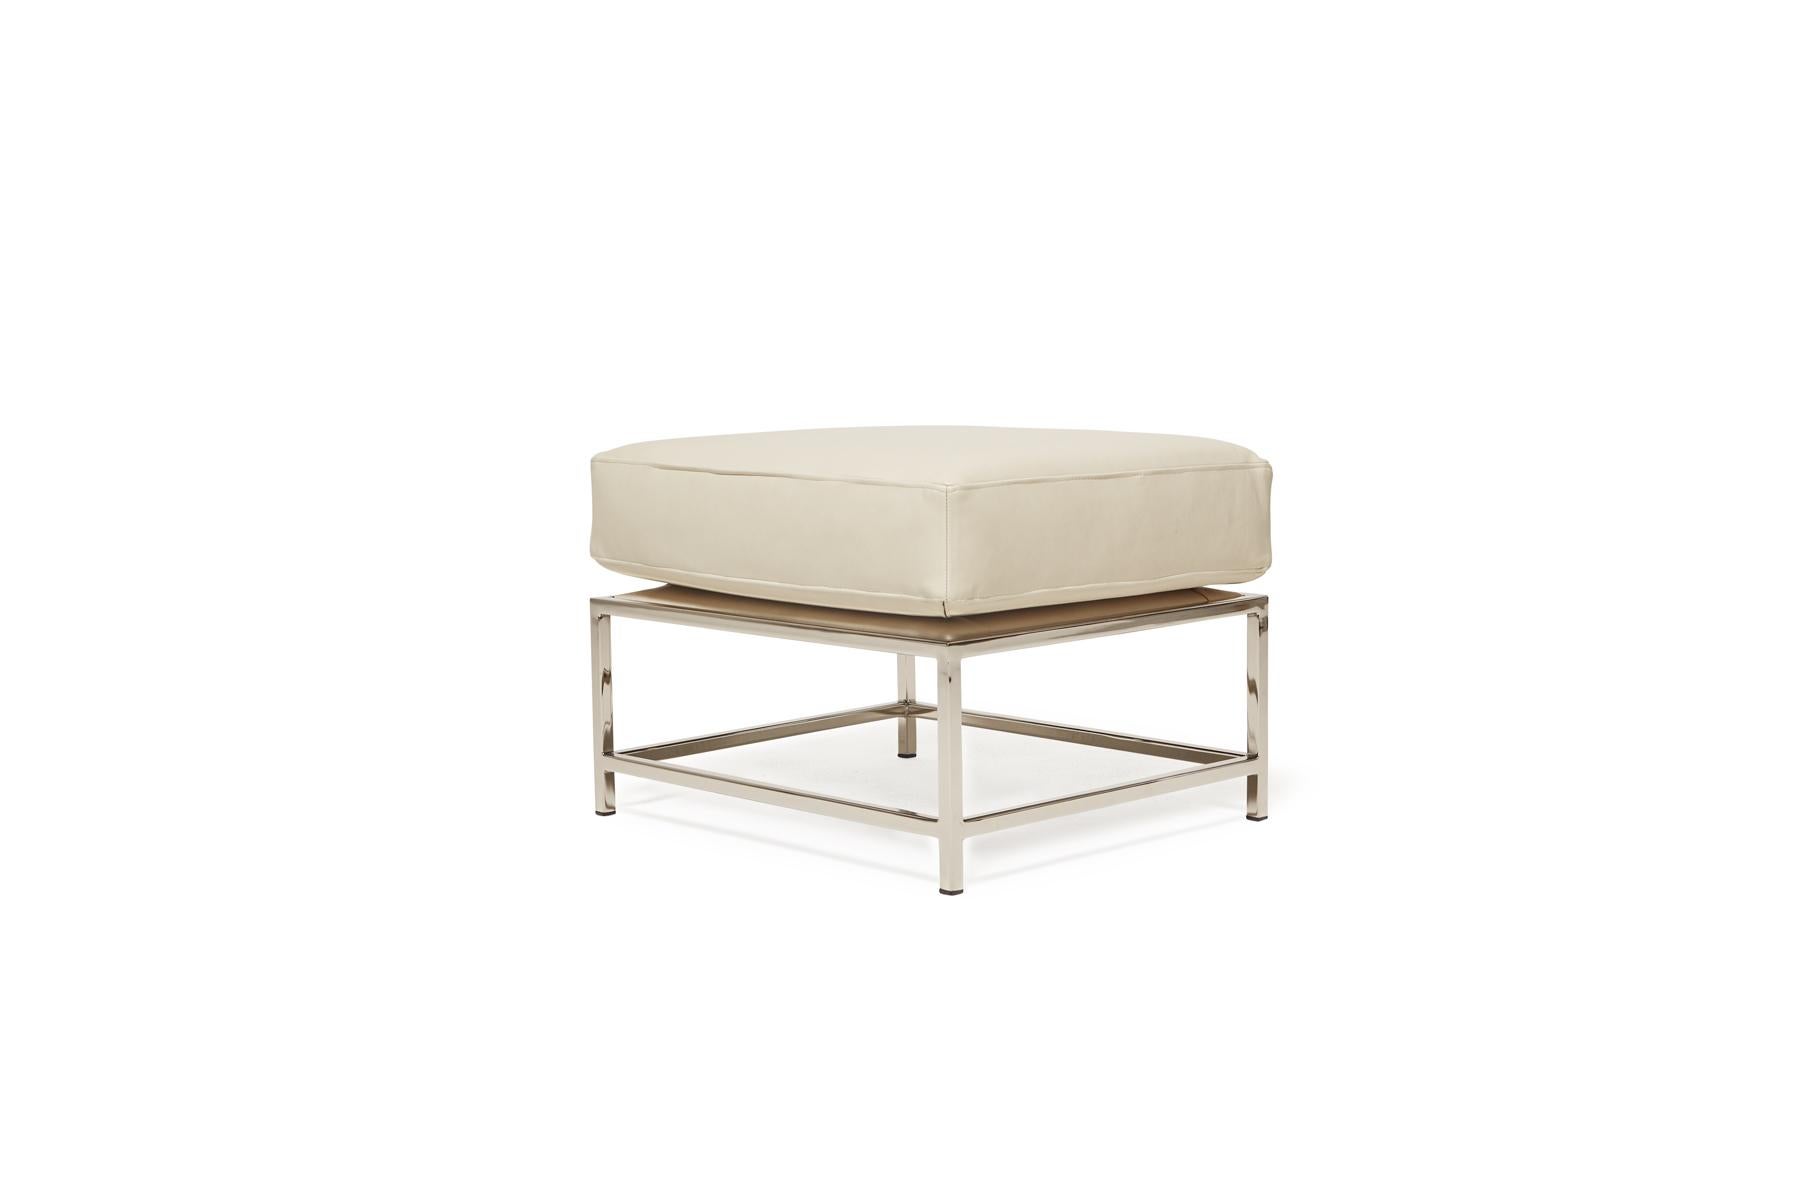 The ottoman from Stephen Kenn's Inheritance Collection is a versatile piece to add a lounge element to your seating arrangement.

This variation is upholstered in a smooth, cream-colored leather from the Valhalla Collection by Moore & Giles with a